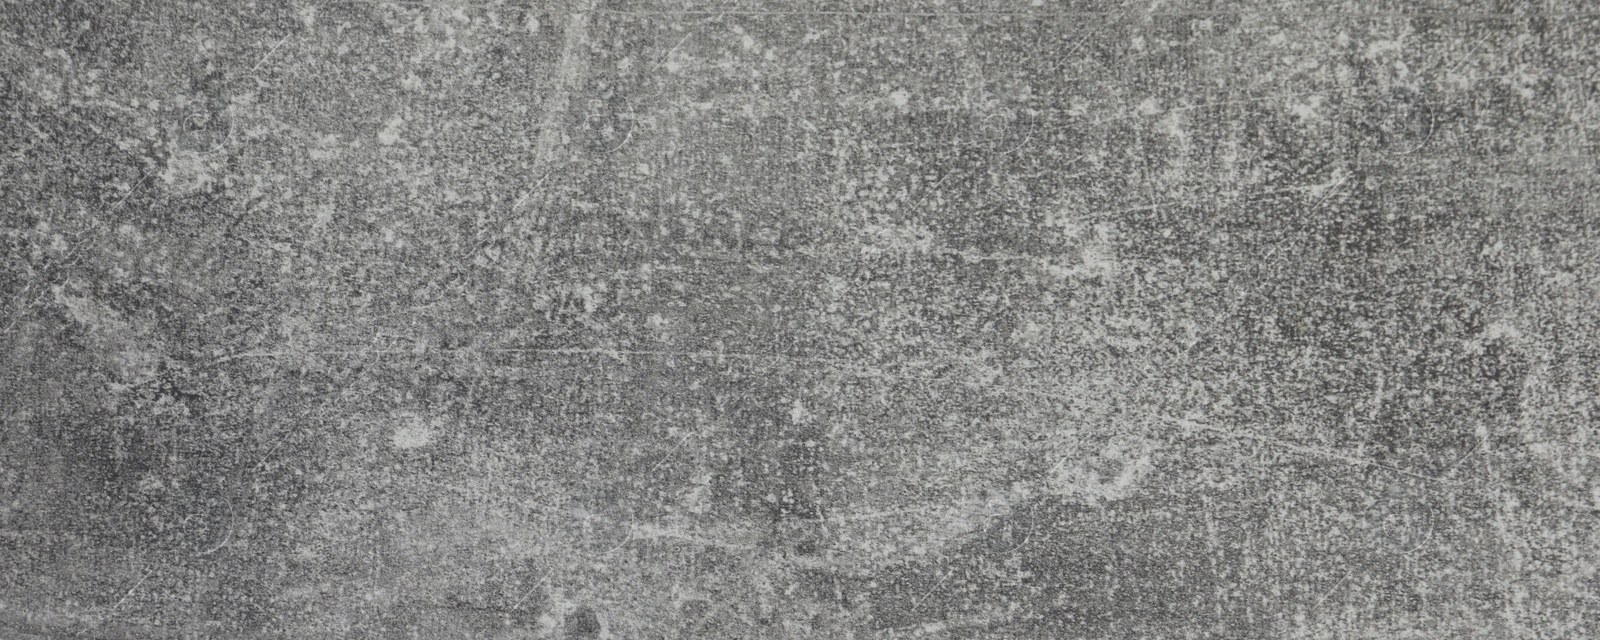 Image of Texture of grey stone surface as background, closeup. Banner design